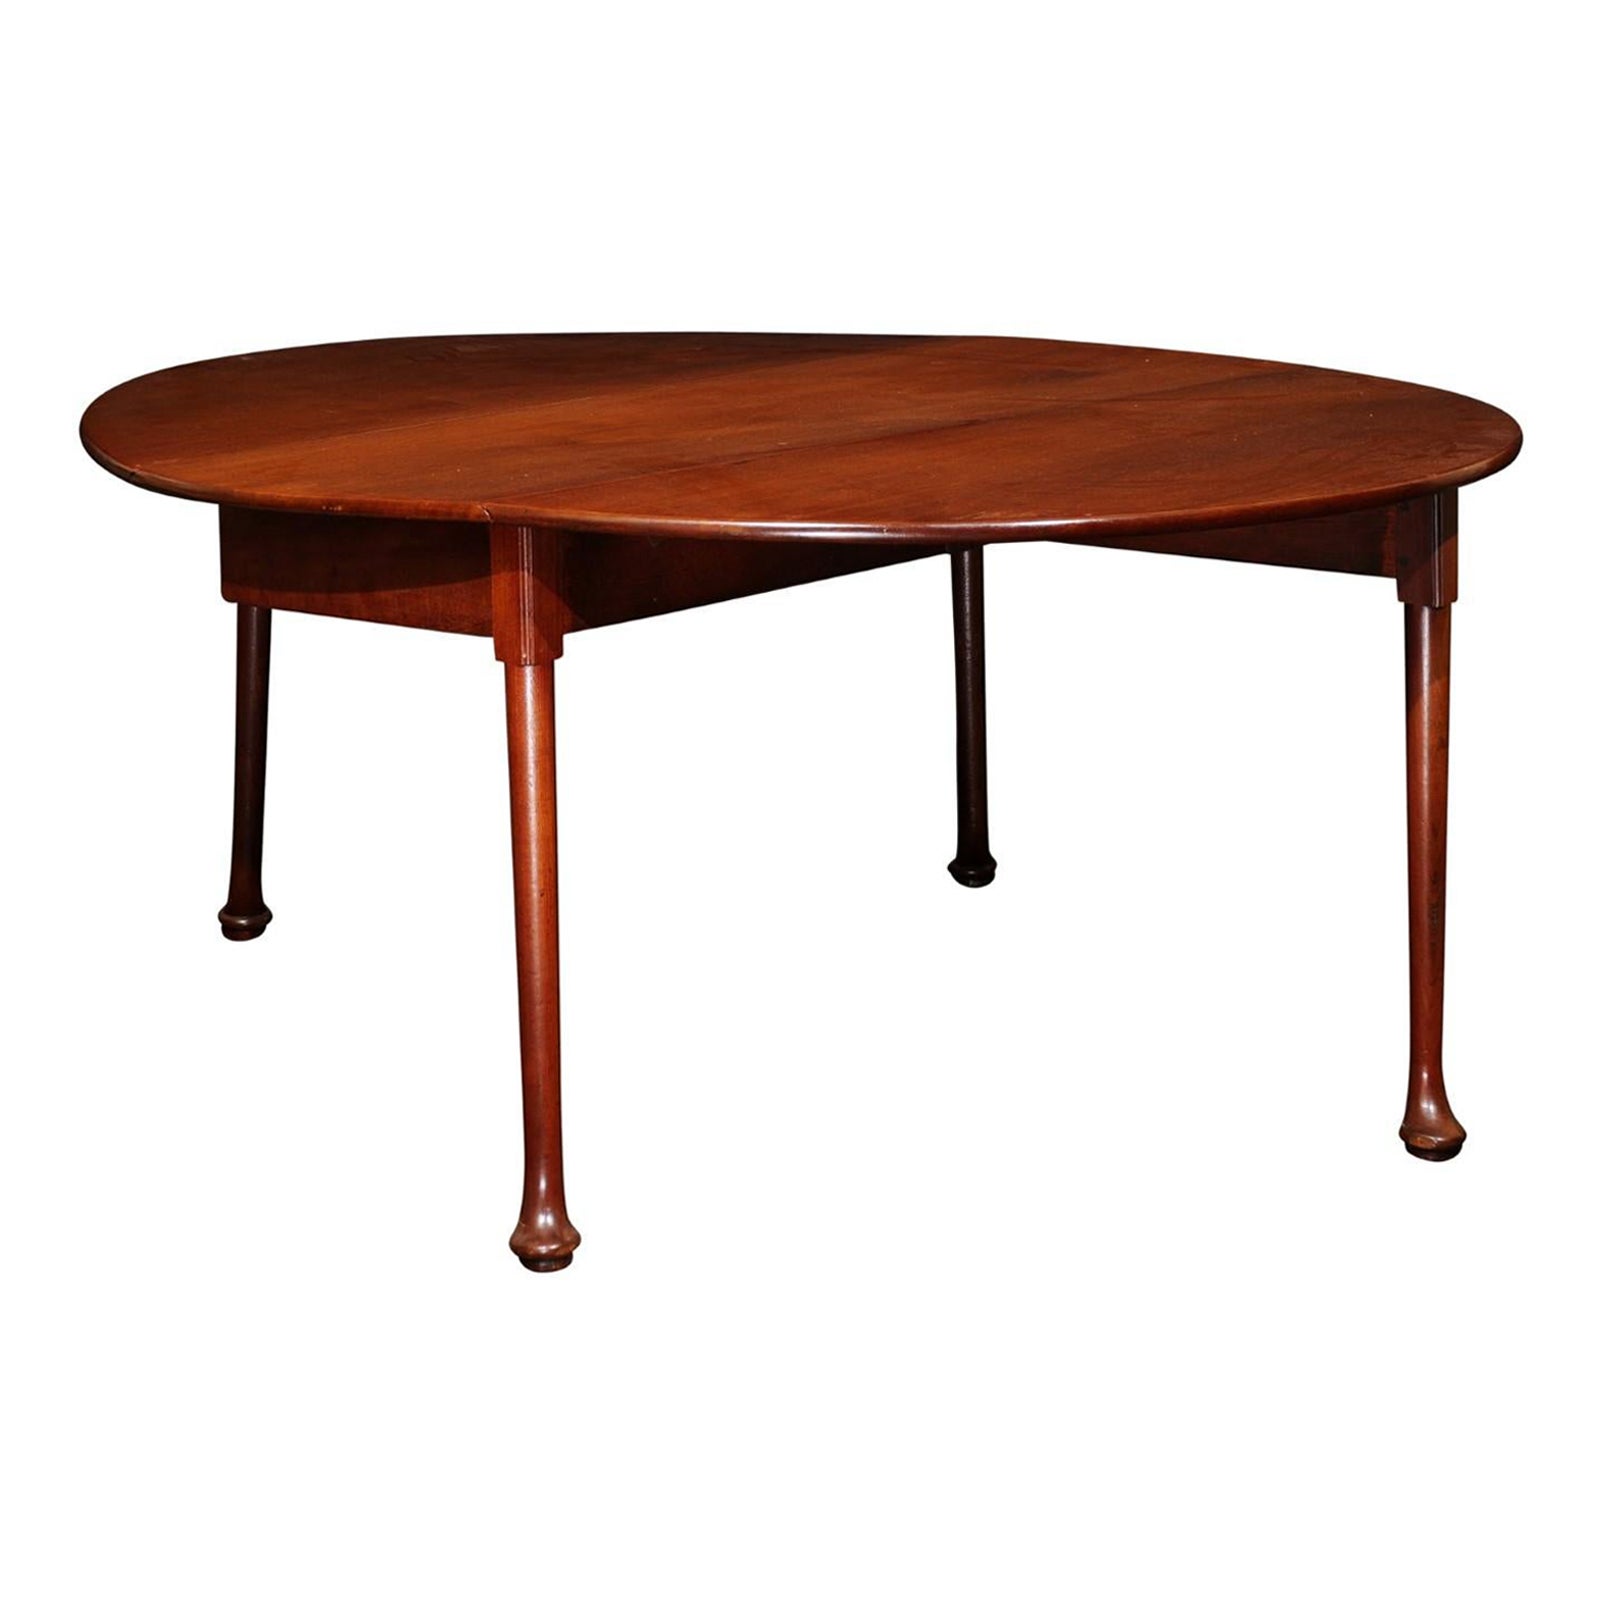  Mid-18th C English George II Mahogany Drop Leaf Oval Dining Table with Pad Feet For Sale